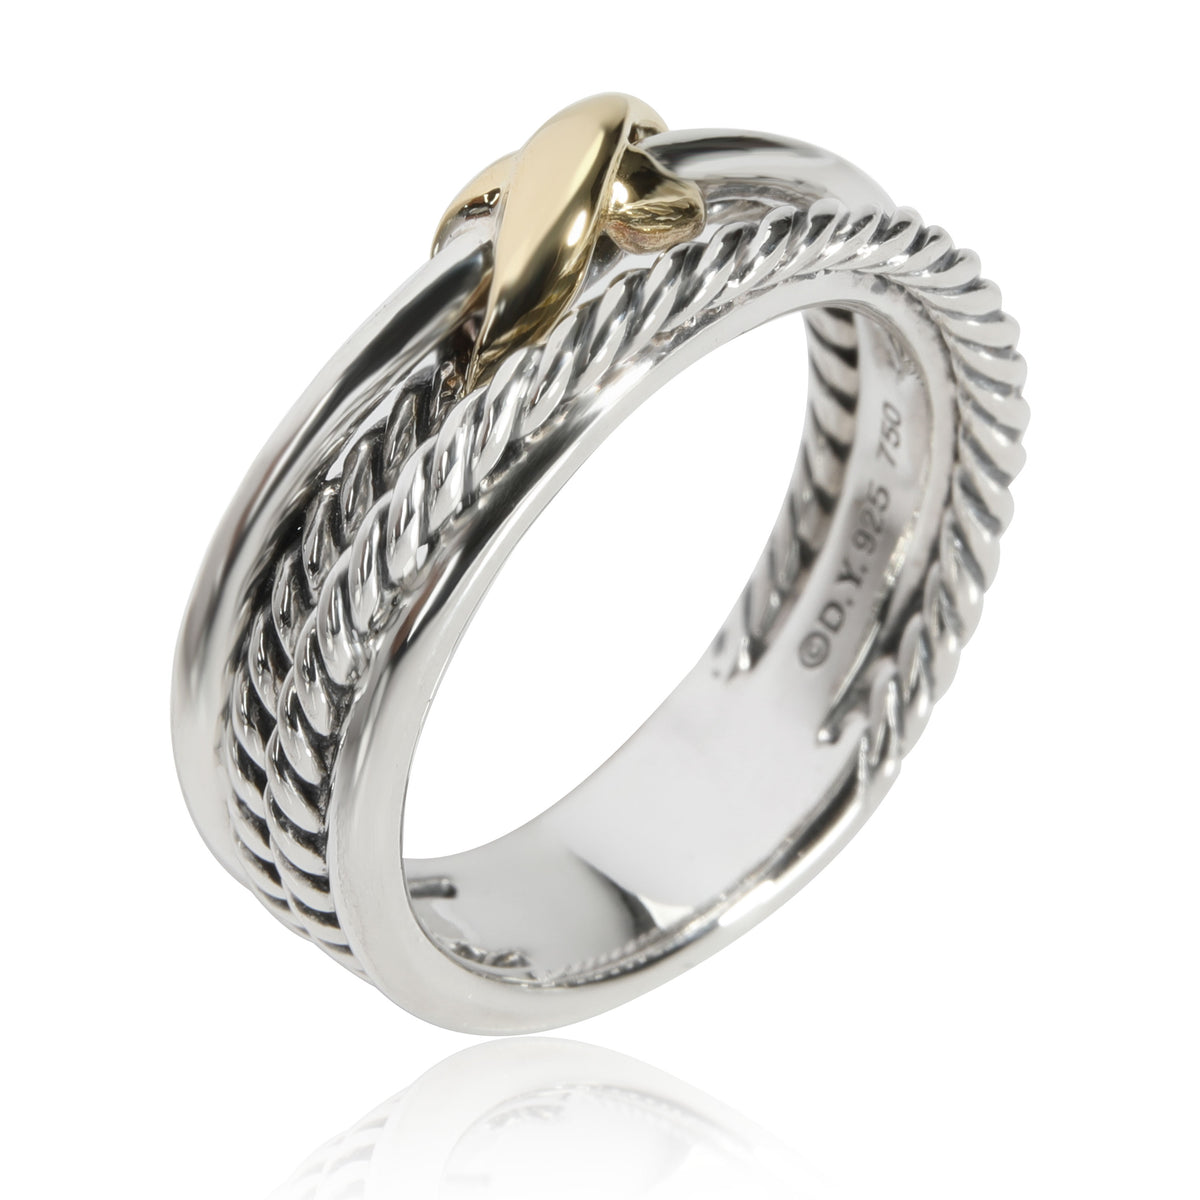 David Yurman Crossover Band in 18K Yellow Gold/Sterling Silver